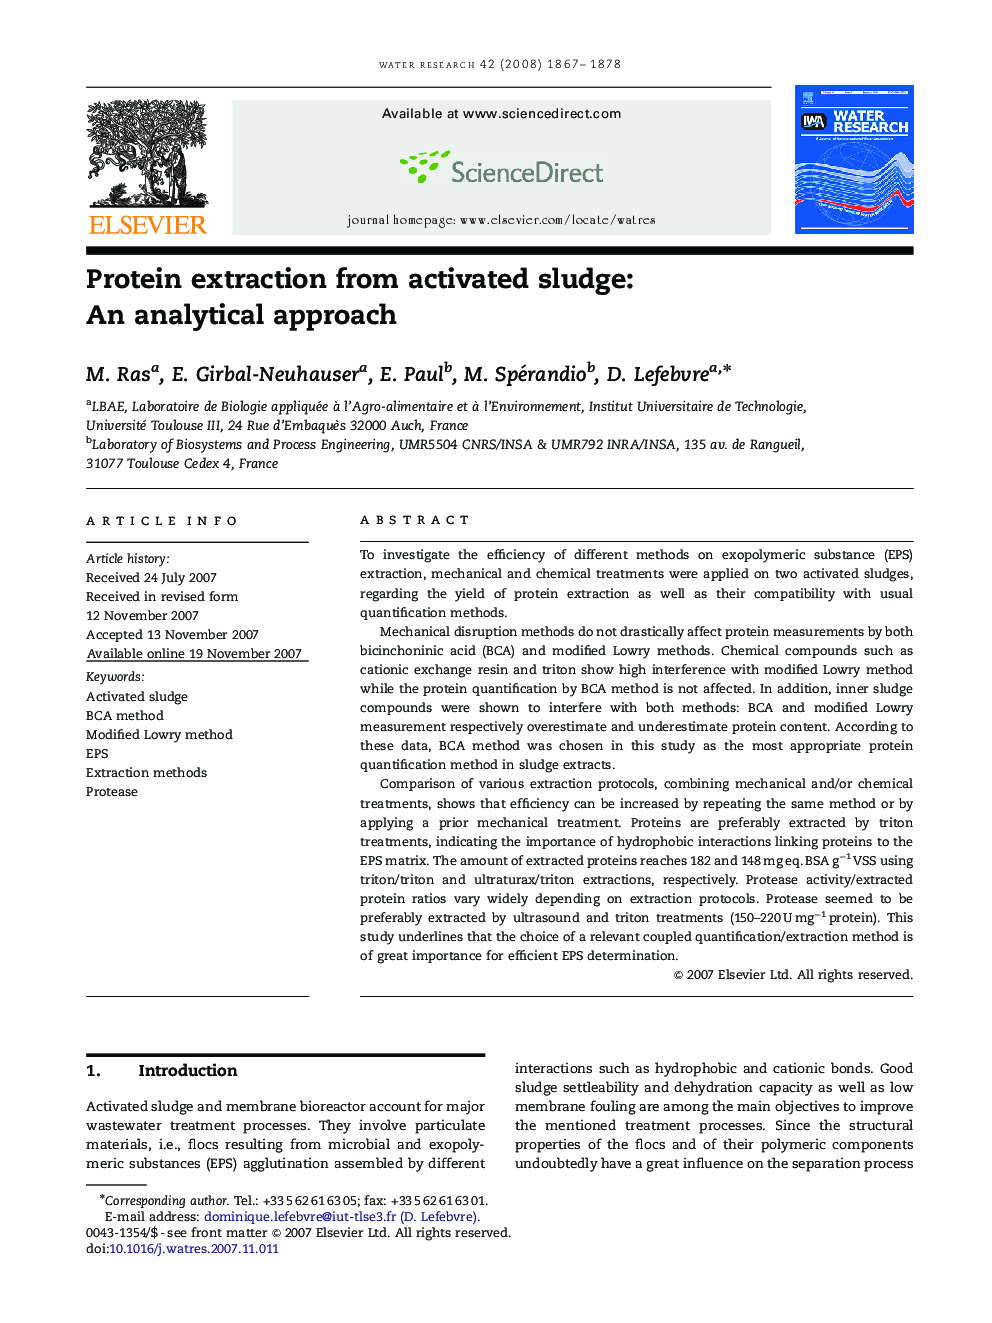 Protein extraction from activated sludge: An analytical approach